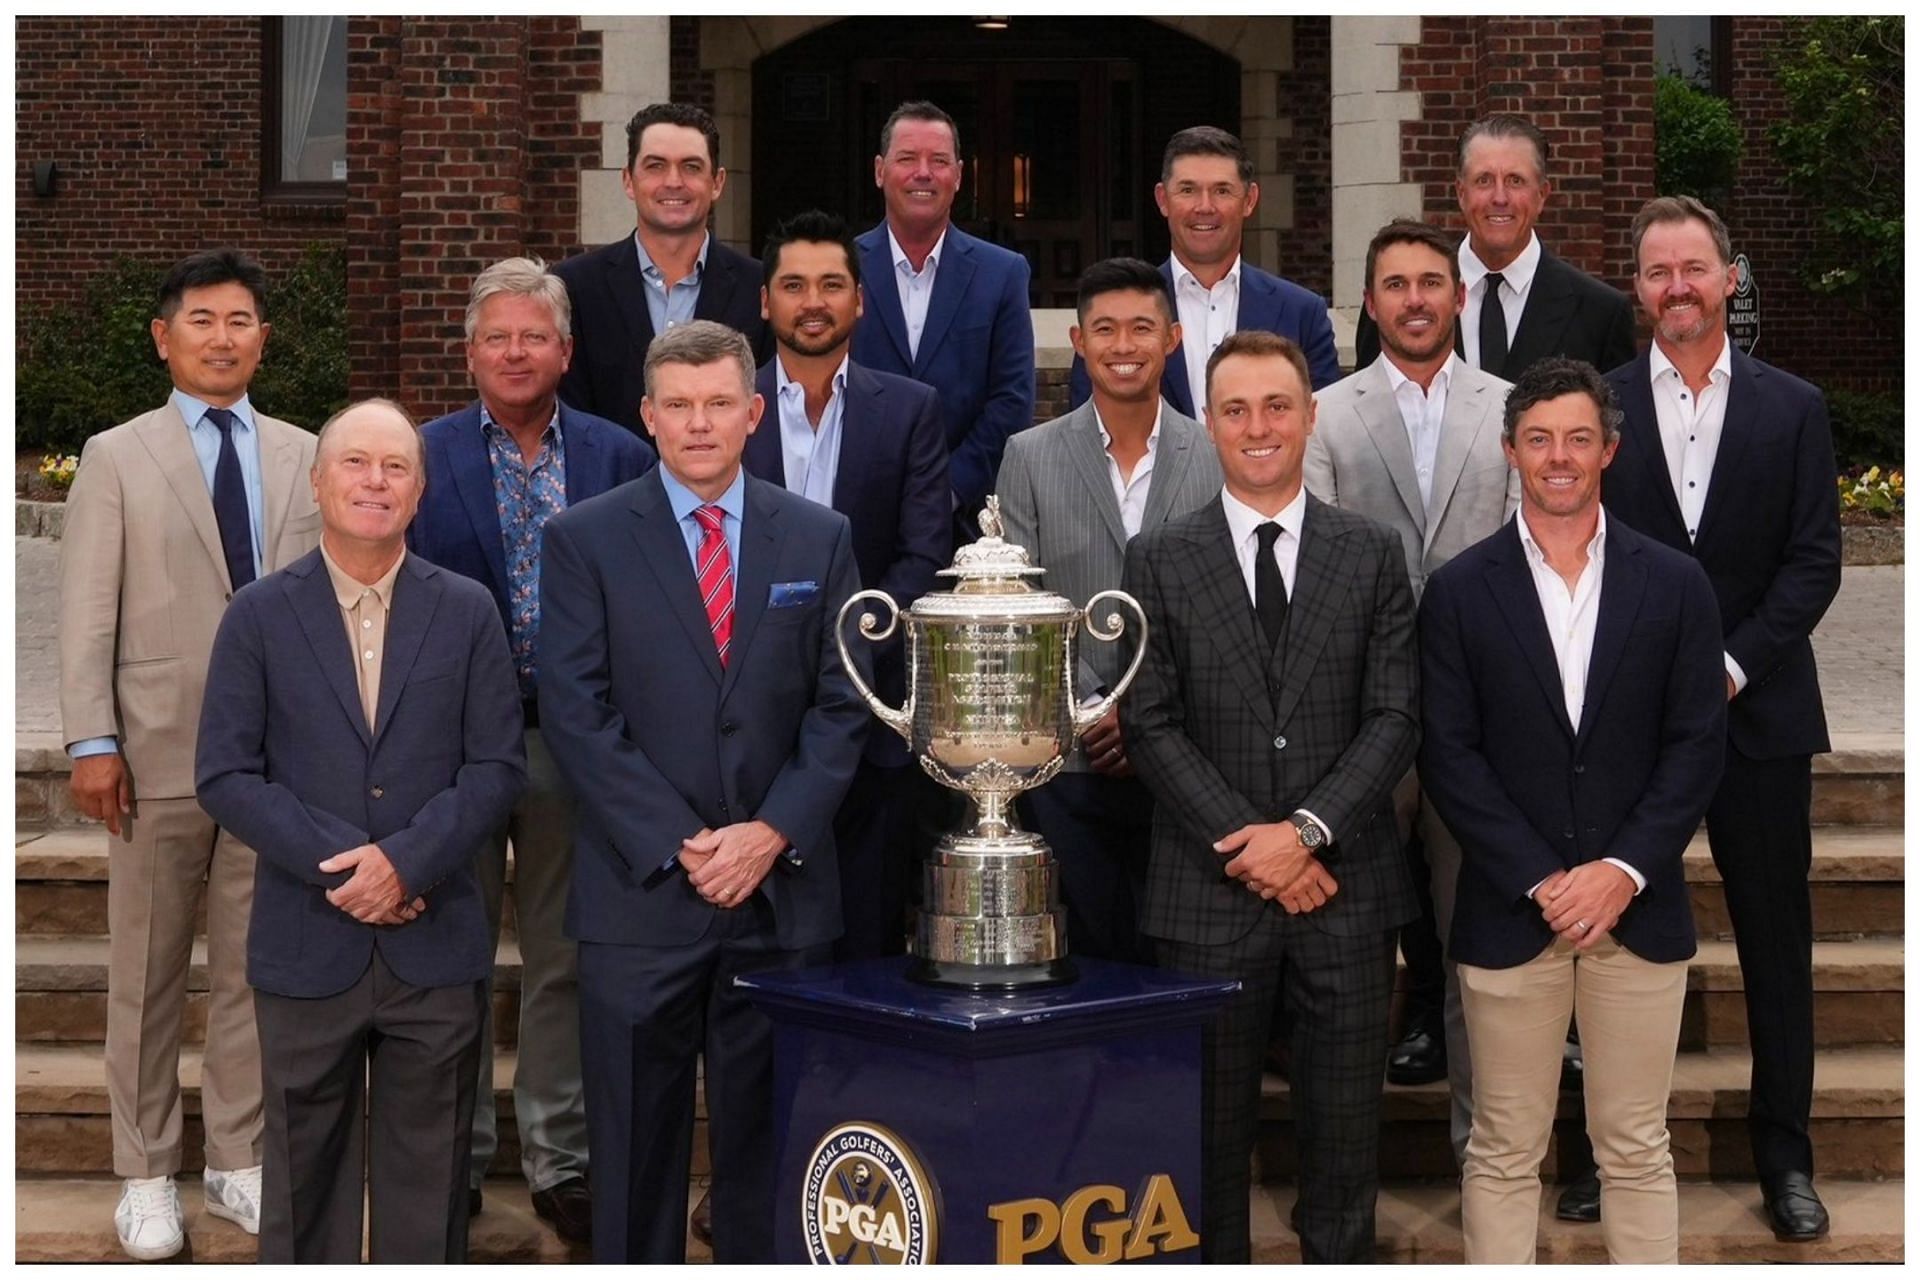 14 former champions pose with the trophy at the 2023 PGA Championship Champions Dinner